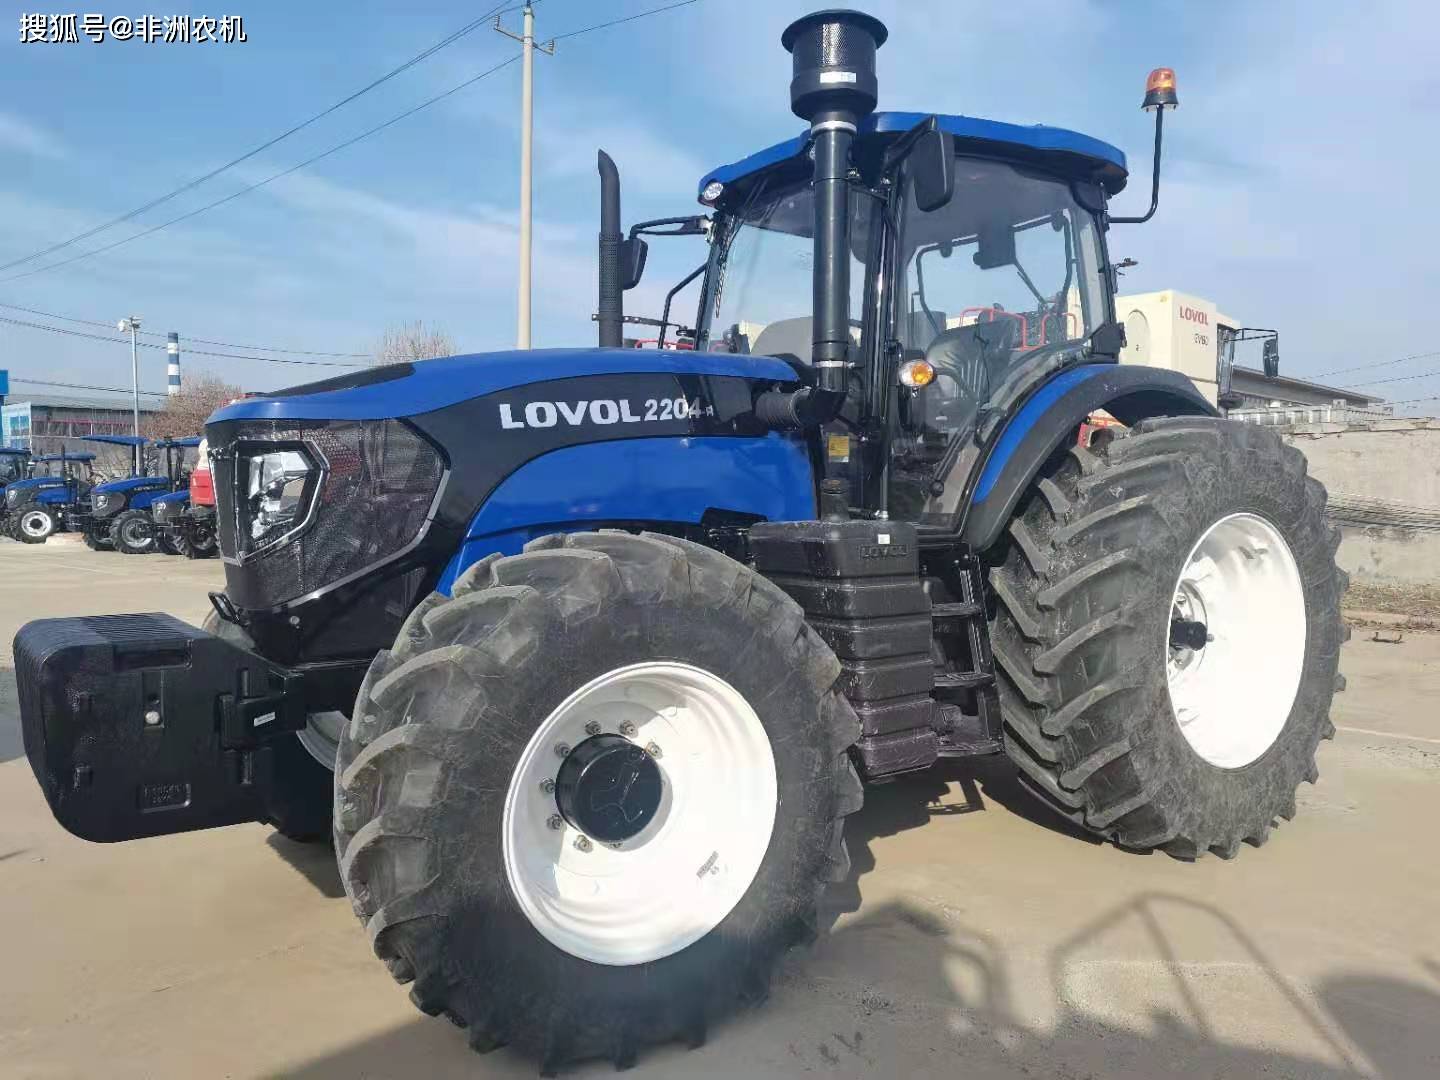 tractor for africa雷沃拖拉机weichai lovol africa